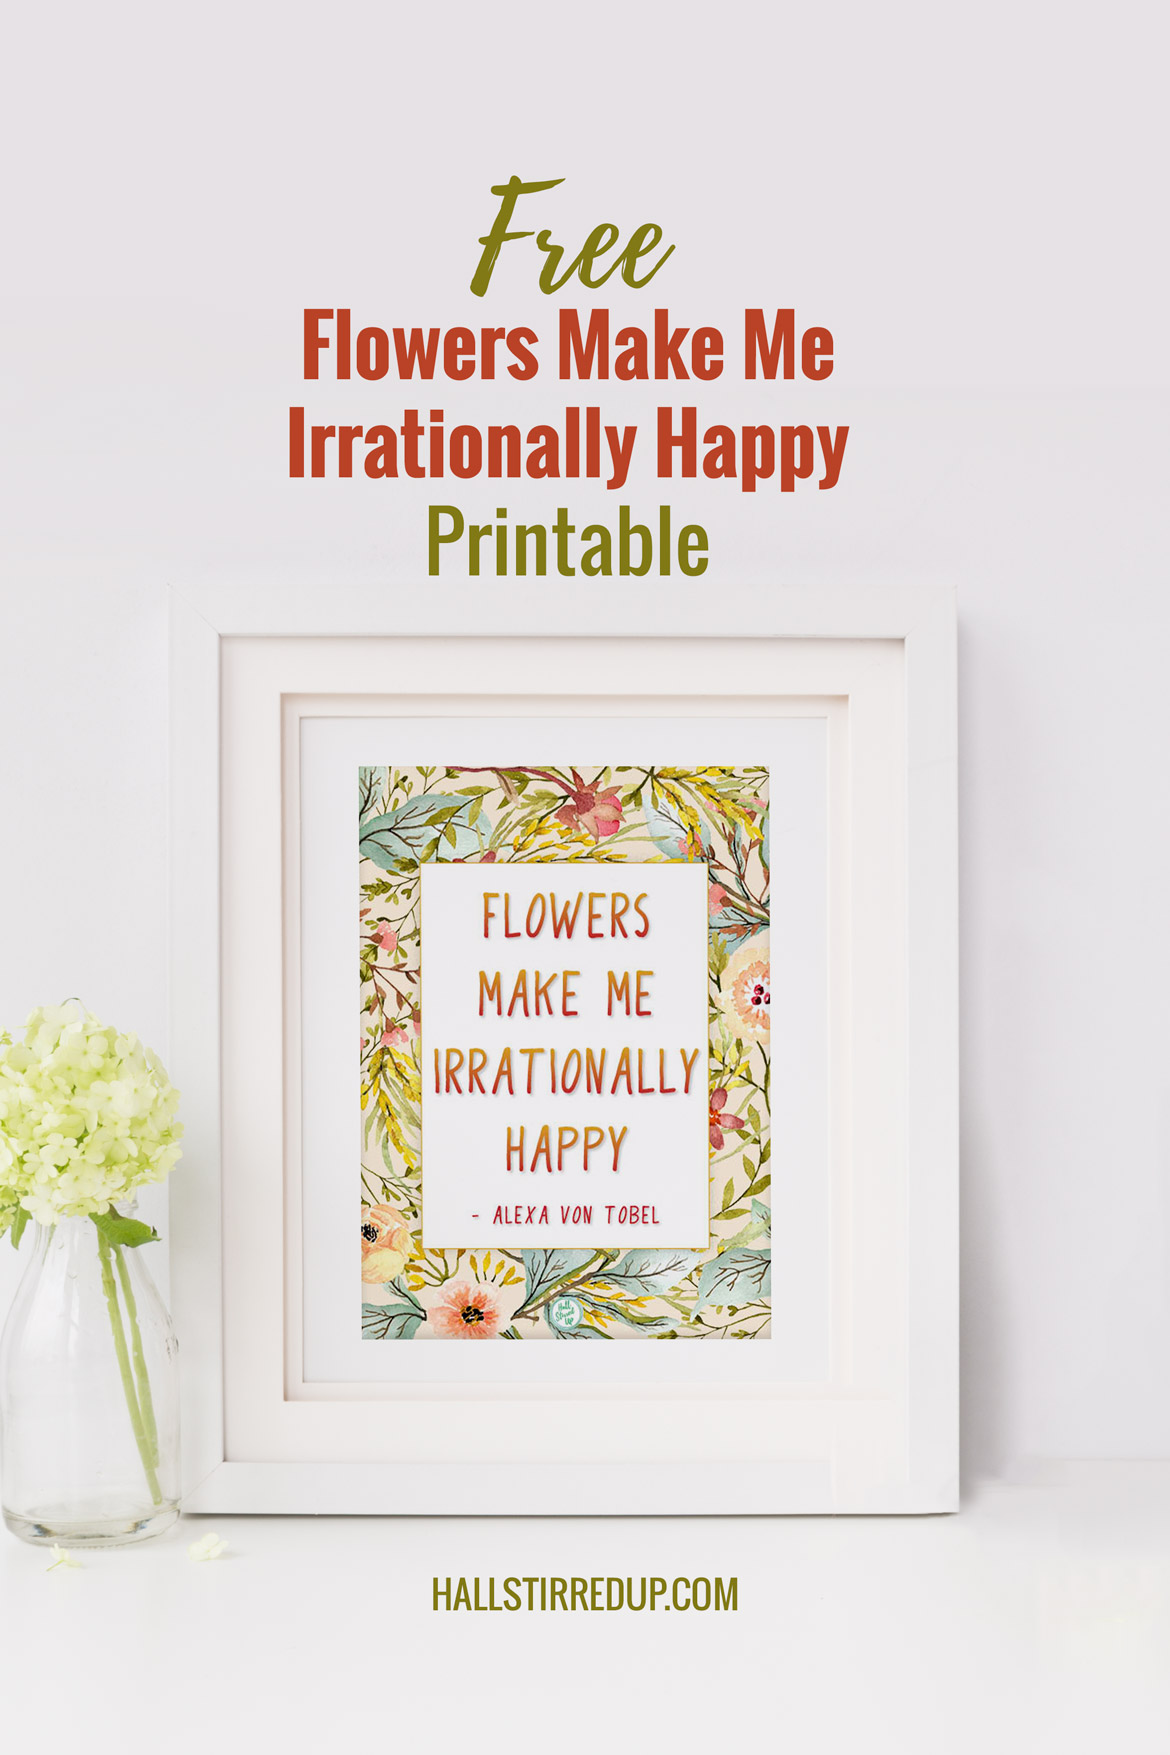 Spring flowers make me happy - includes a free printable